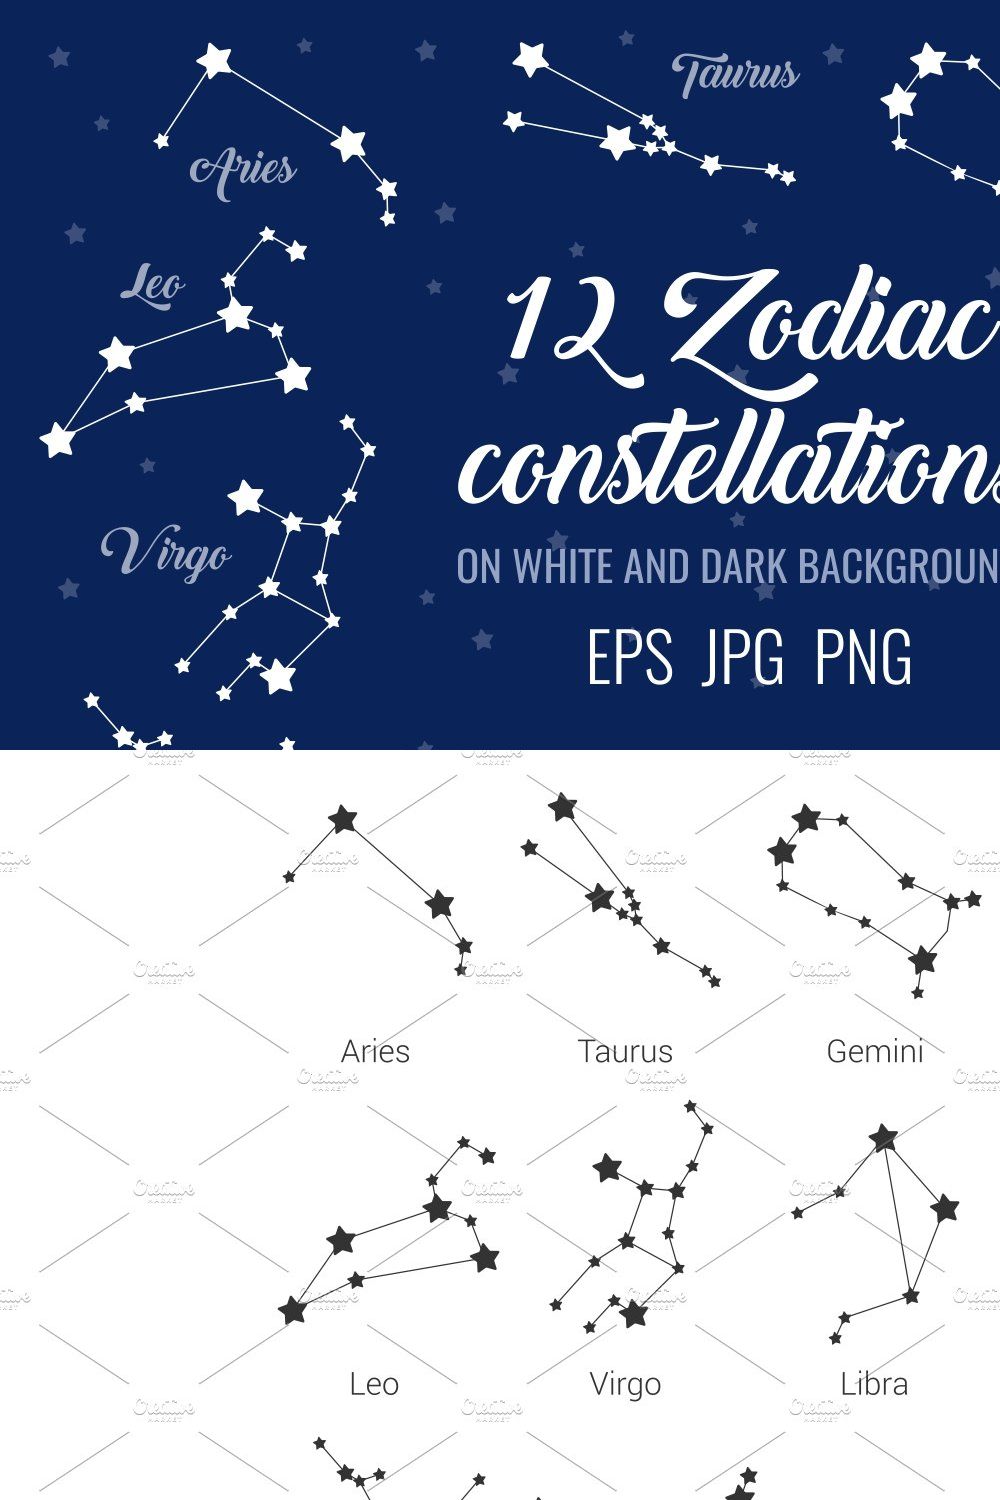 12 zodiac signs constellations pinterest preview image.